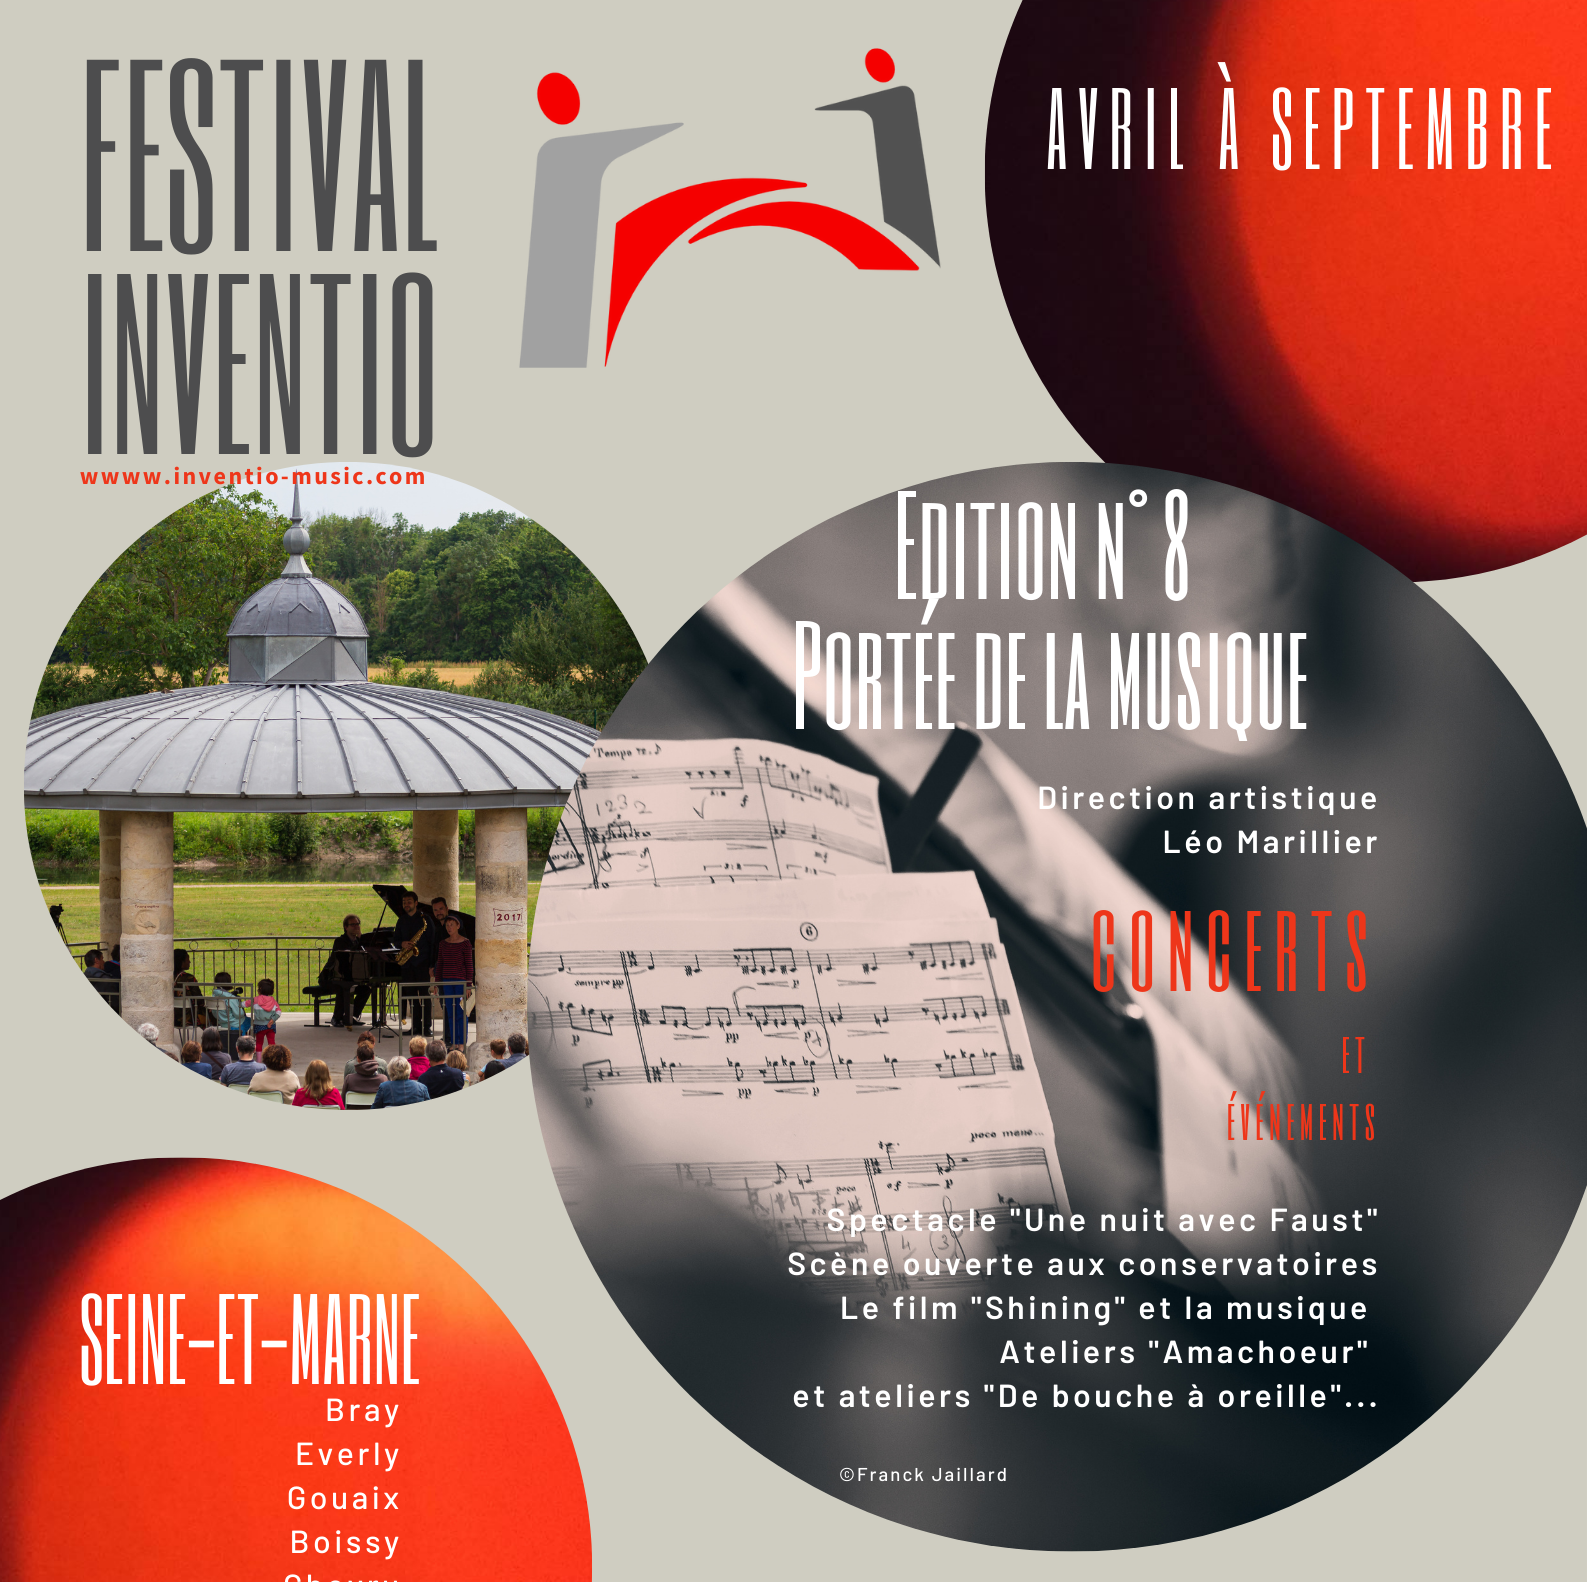 You are currently viewing FESTIVAL INVENTIO – Programmation AVRIL > SEPTEMBRE 2023